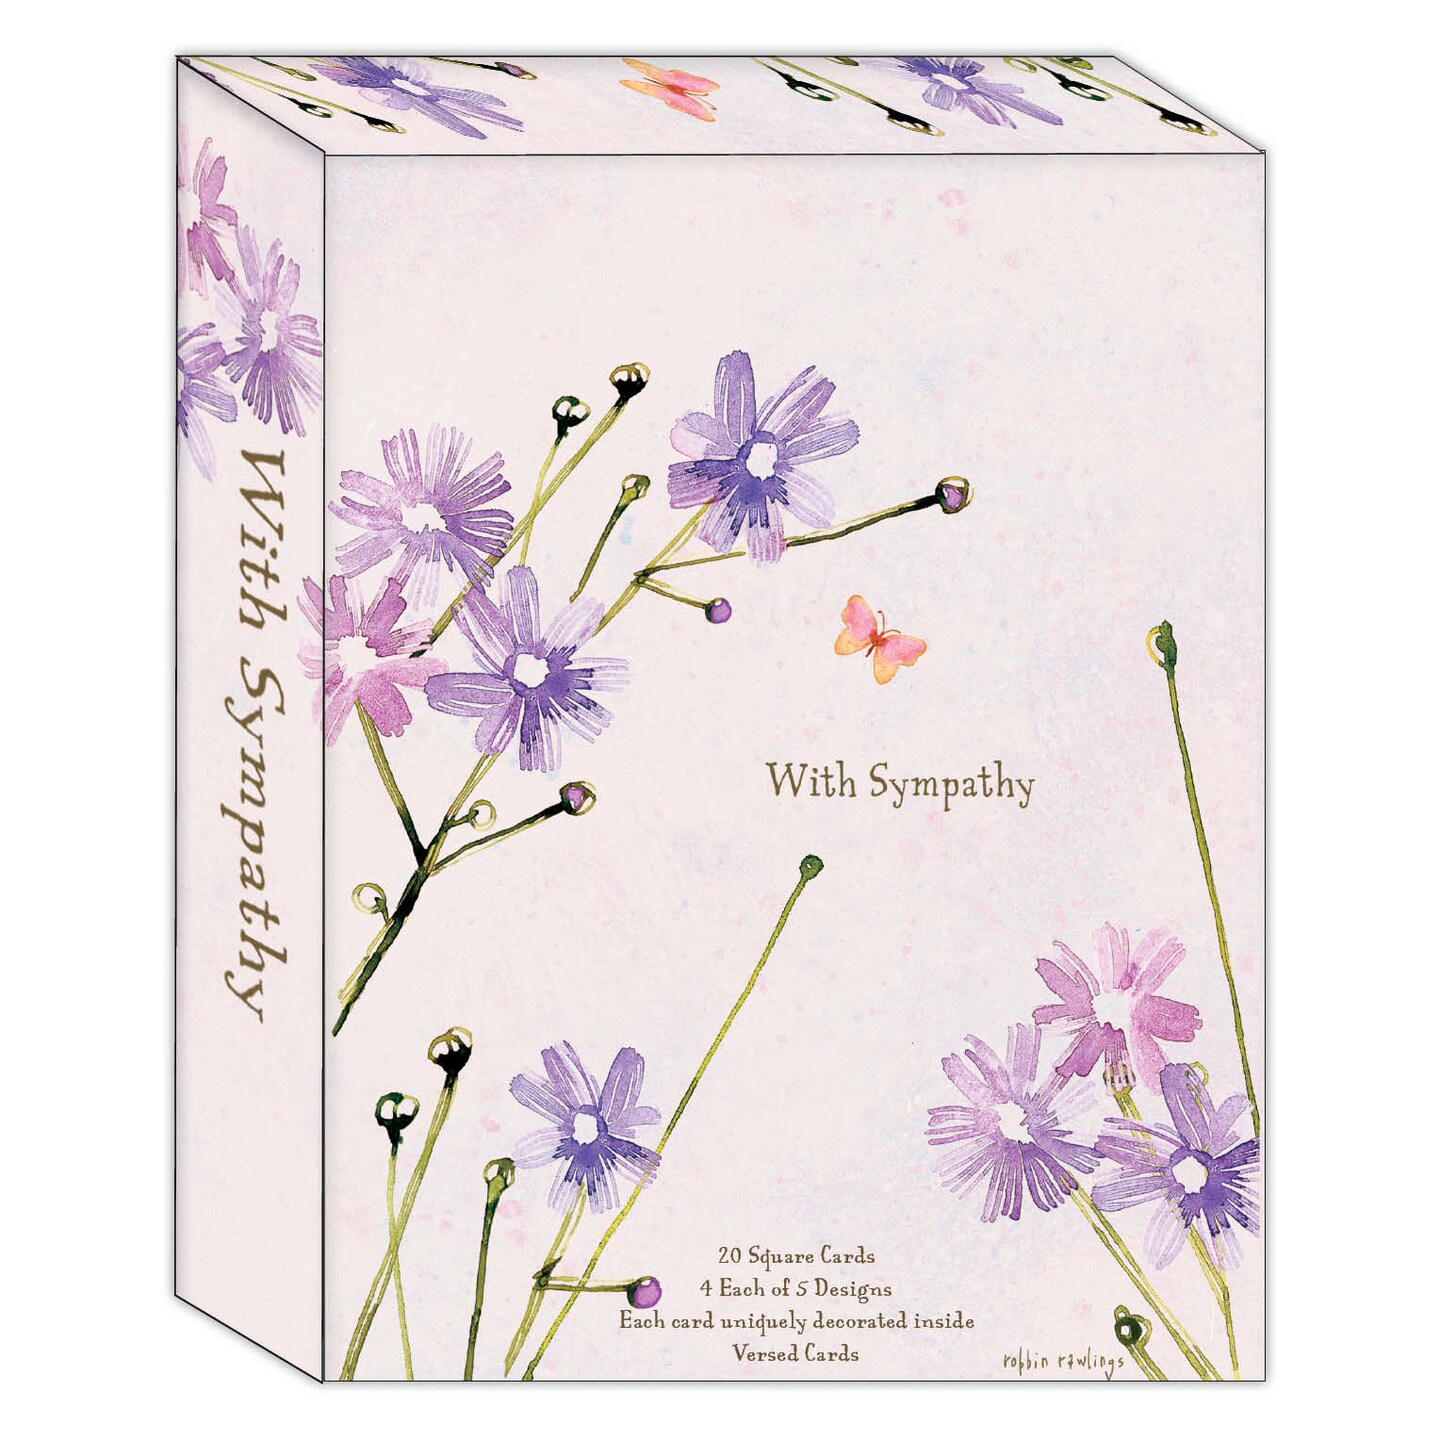 With Sympathy - Boxed Note Card Assortment - 20 Cards &#x26; 20 Envelopes